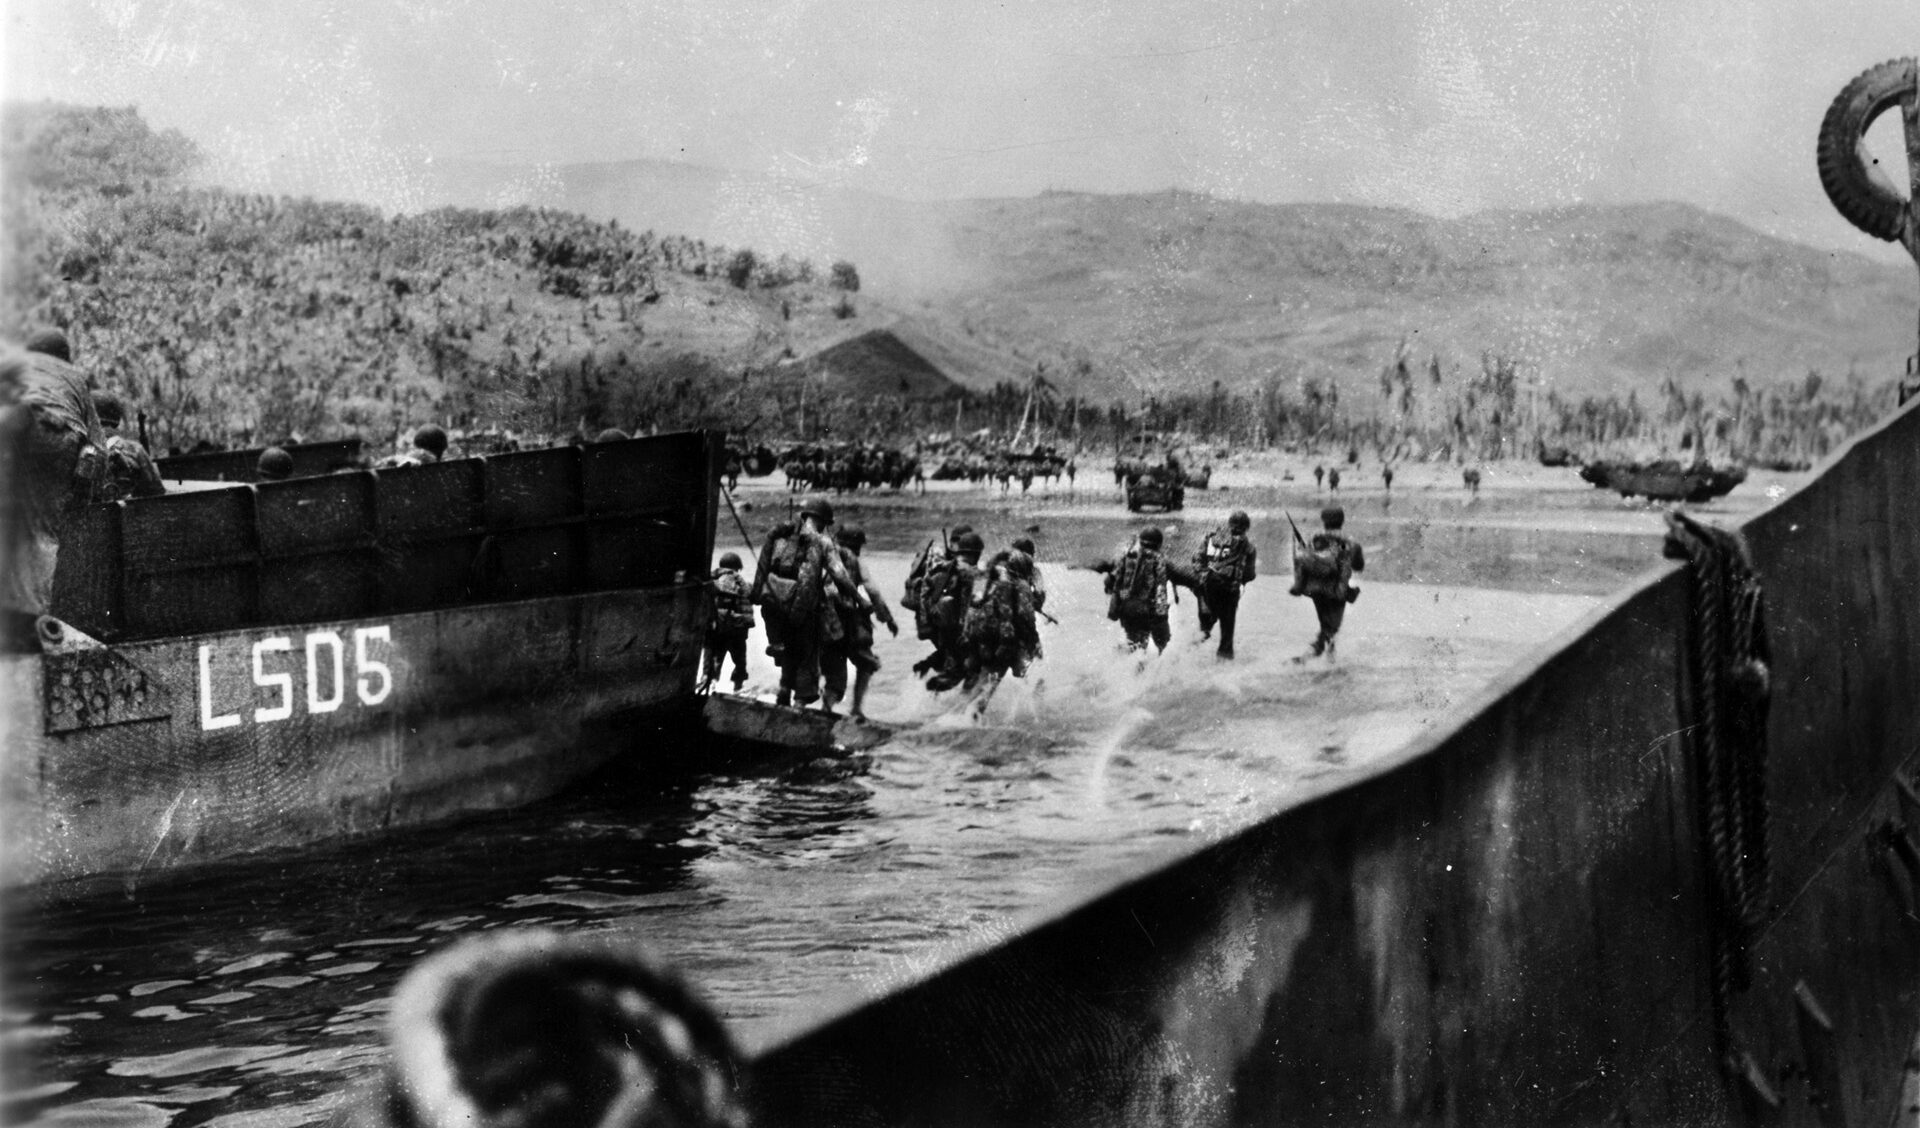 The 3rd Marine Division and the 1st Provisional (Marine) Brigade began landing on Guam at 8:30 am, July 21, 1944, and faced heavy Japanese fire on the beachhead. The 77th Division, initially held in reserve, began landing at 1:00 pm. While the Marines had been in combat before, this would be the 77th’s baptism of fire. 